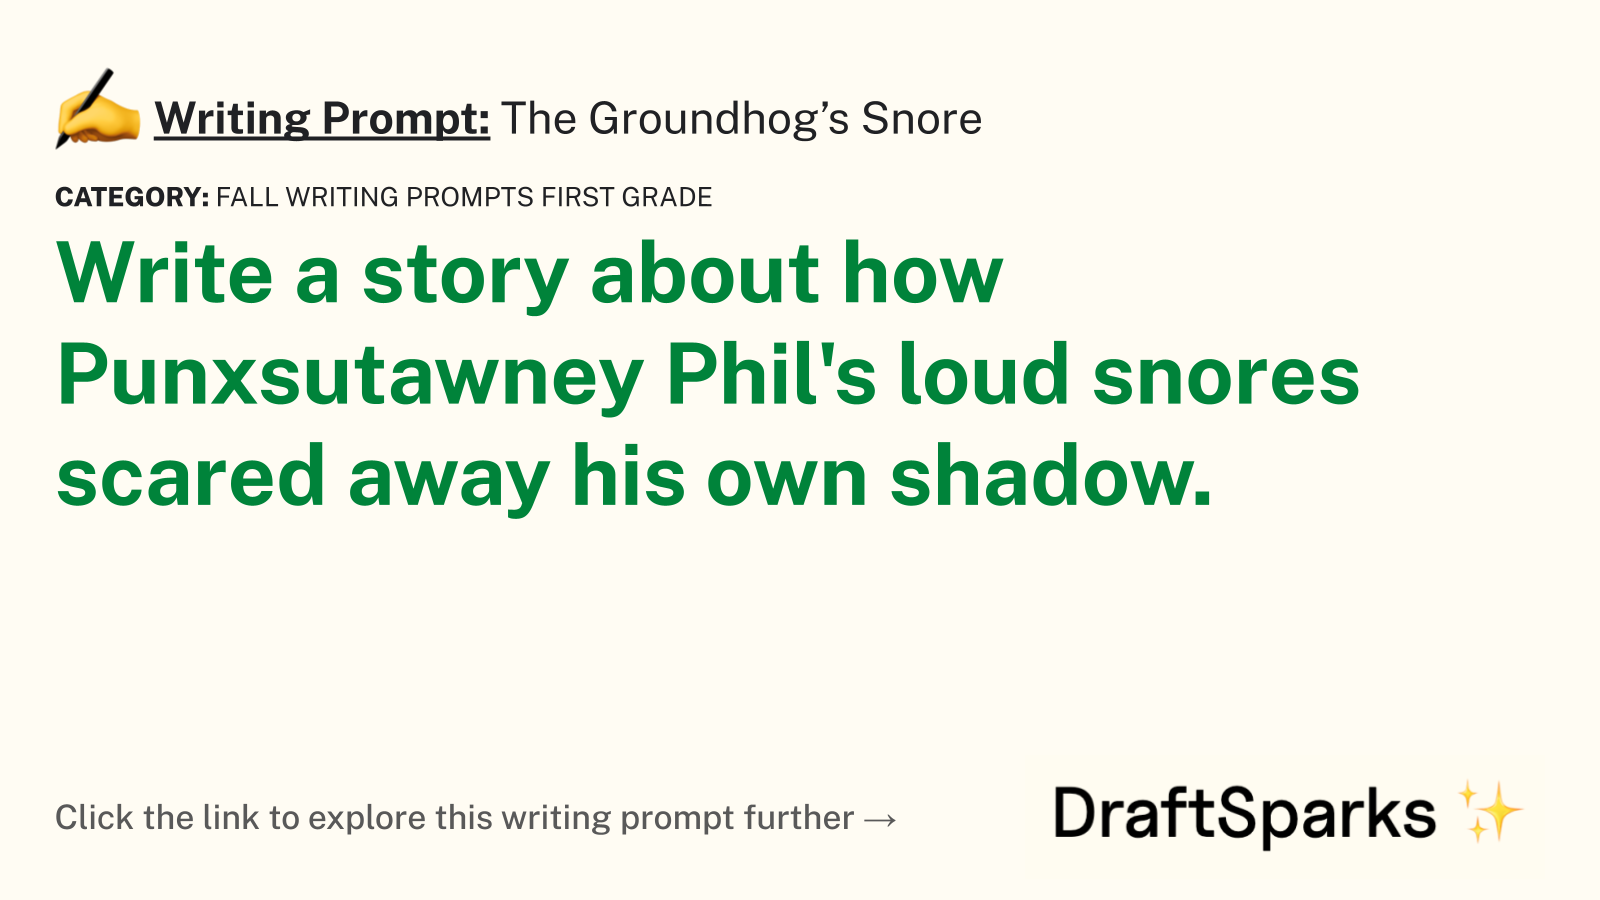 The Groundhog’s Snore